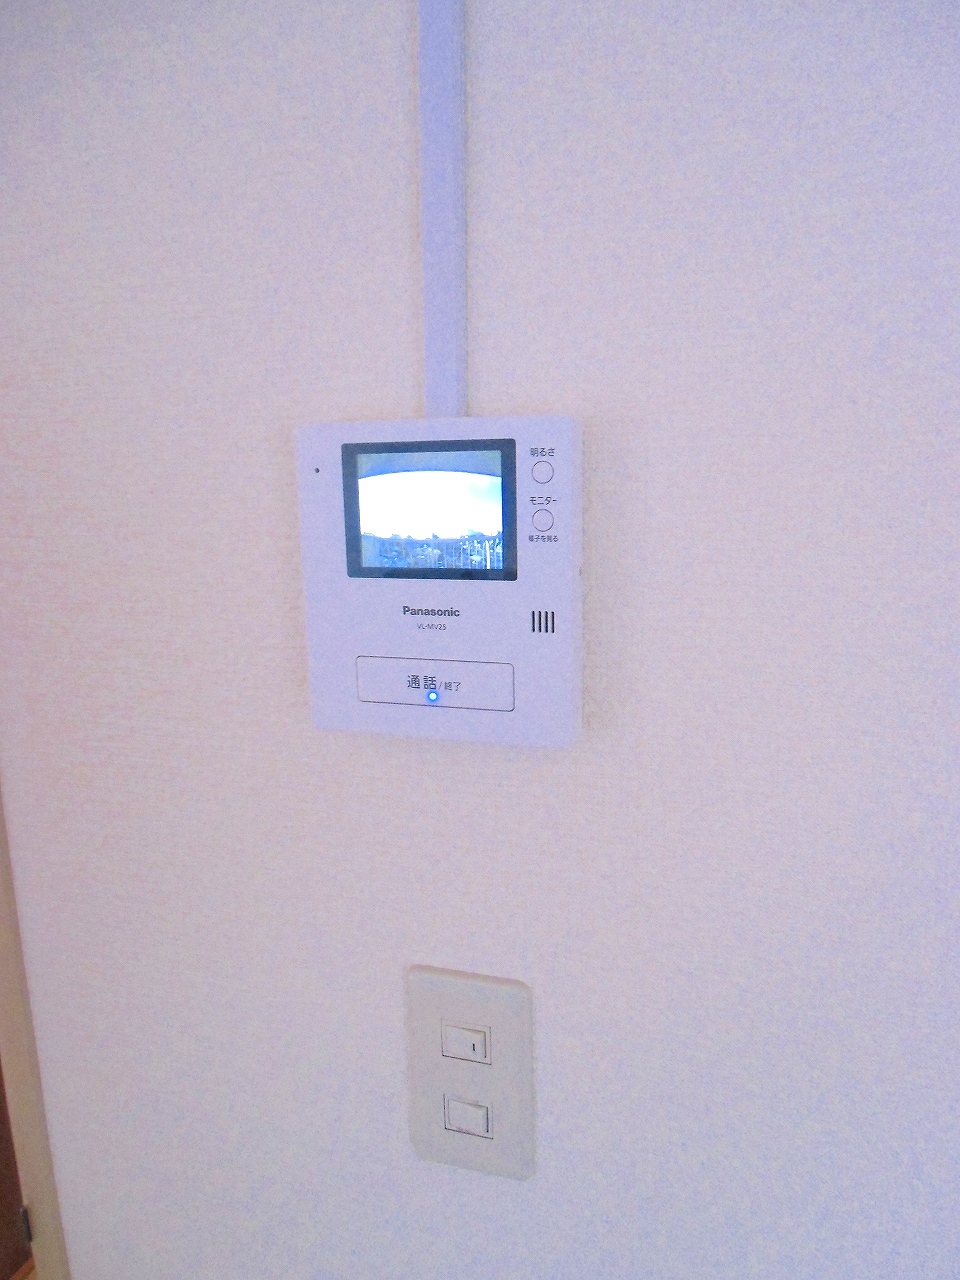 Security. You Yes and TV intercom installation